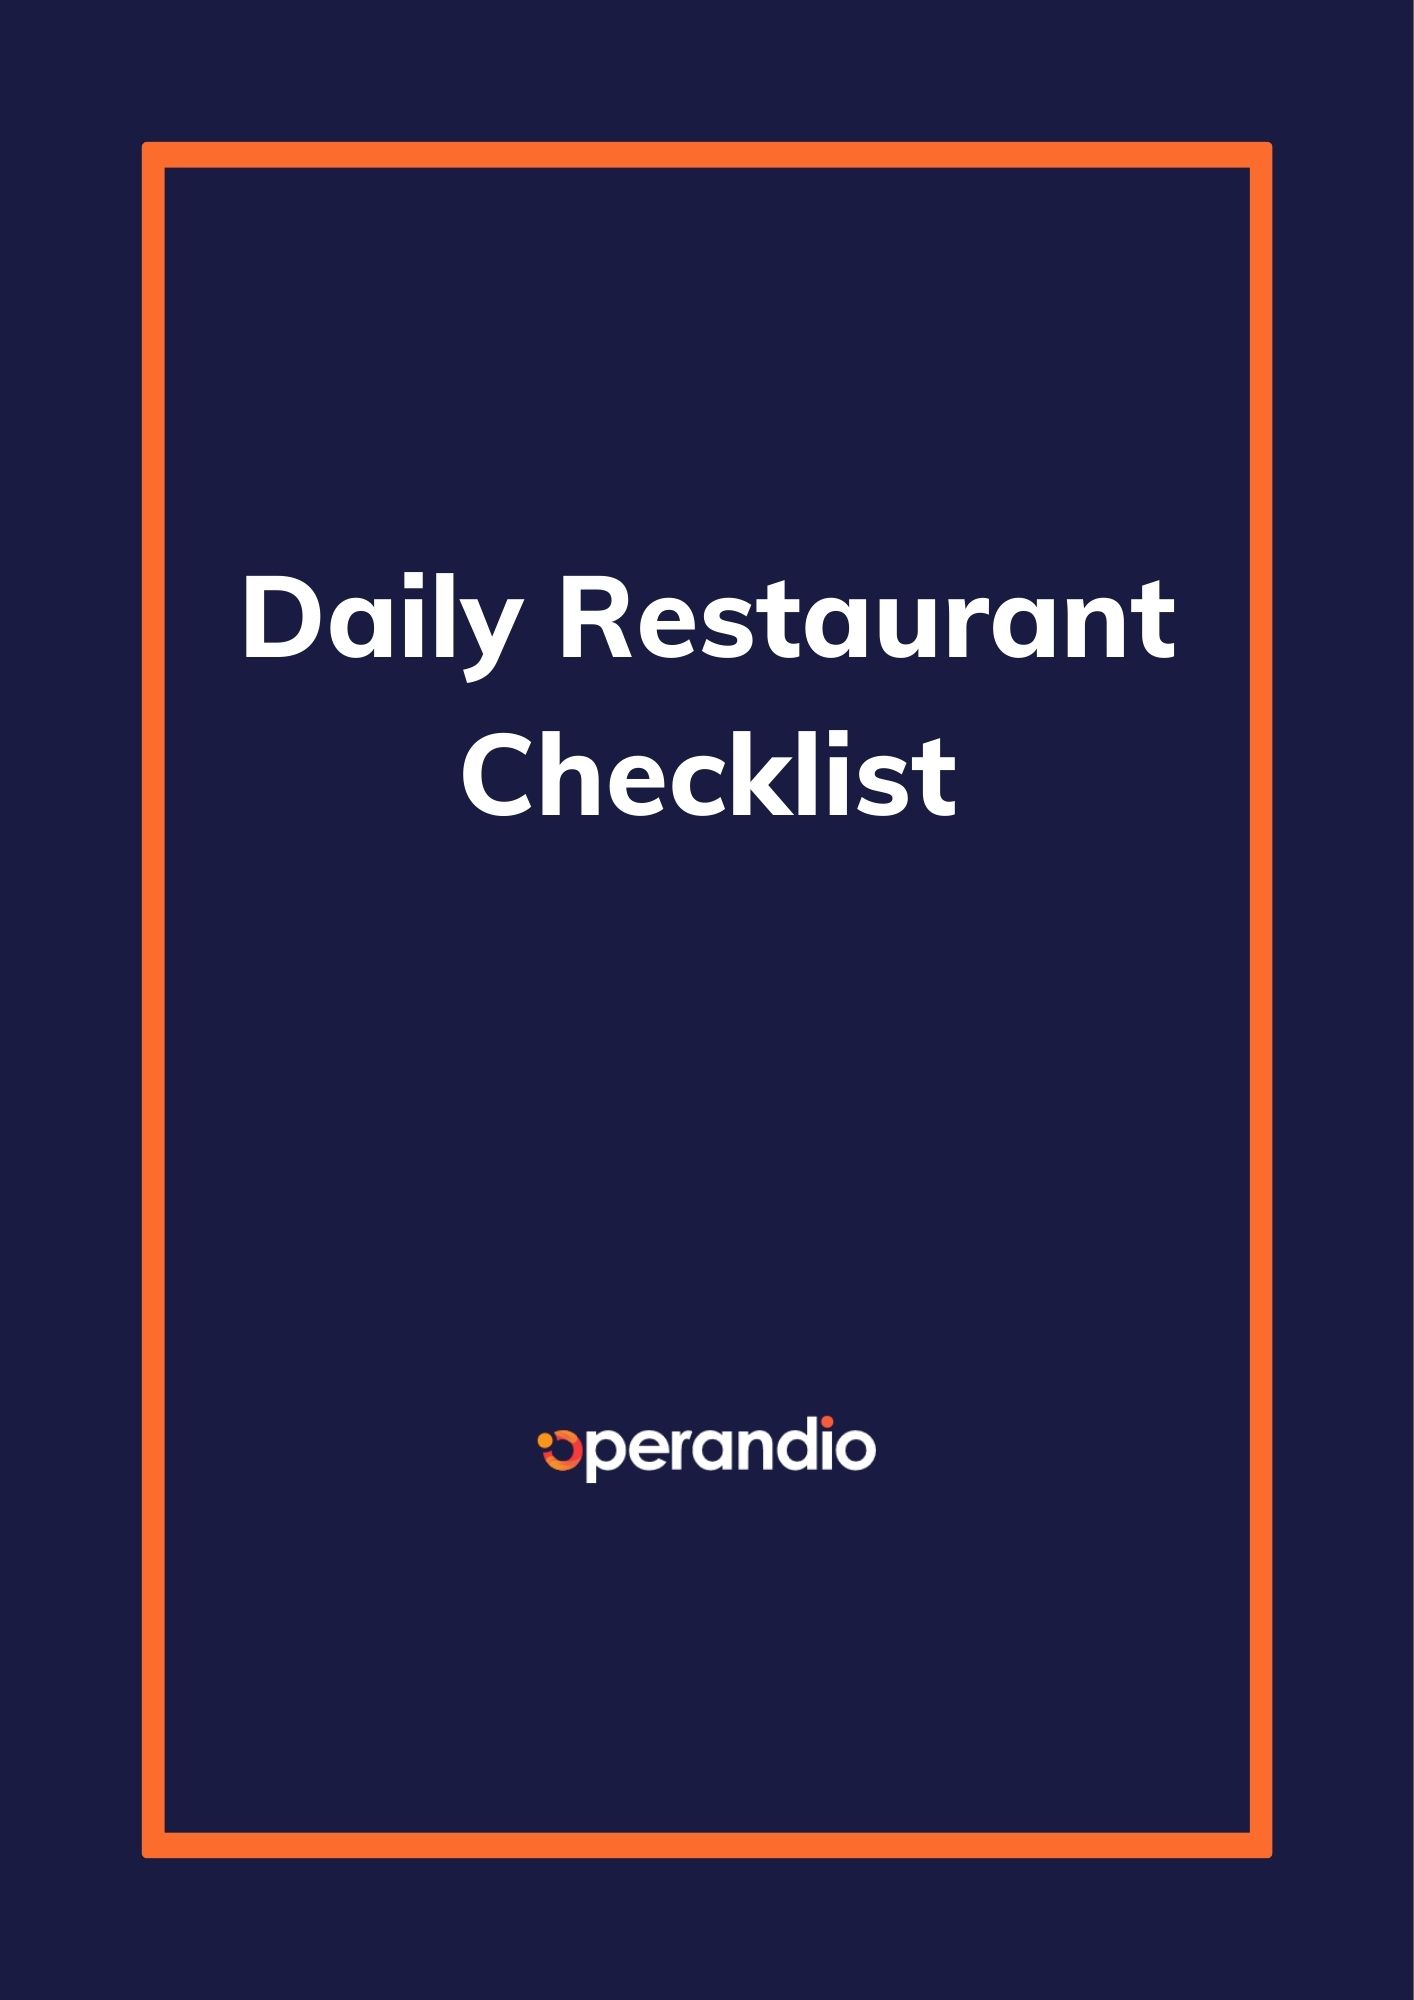 daily restaurant checklist template page 1